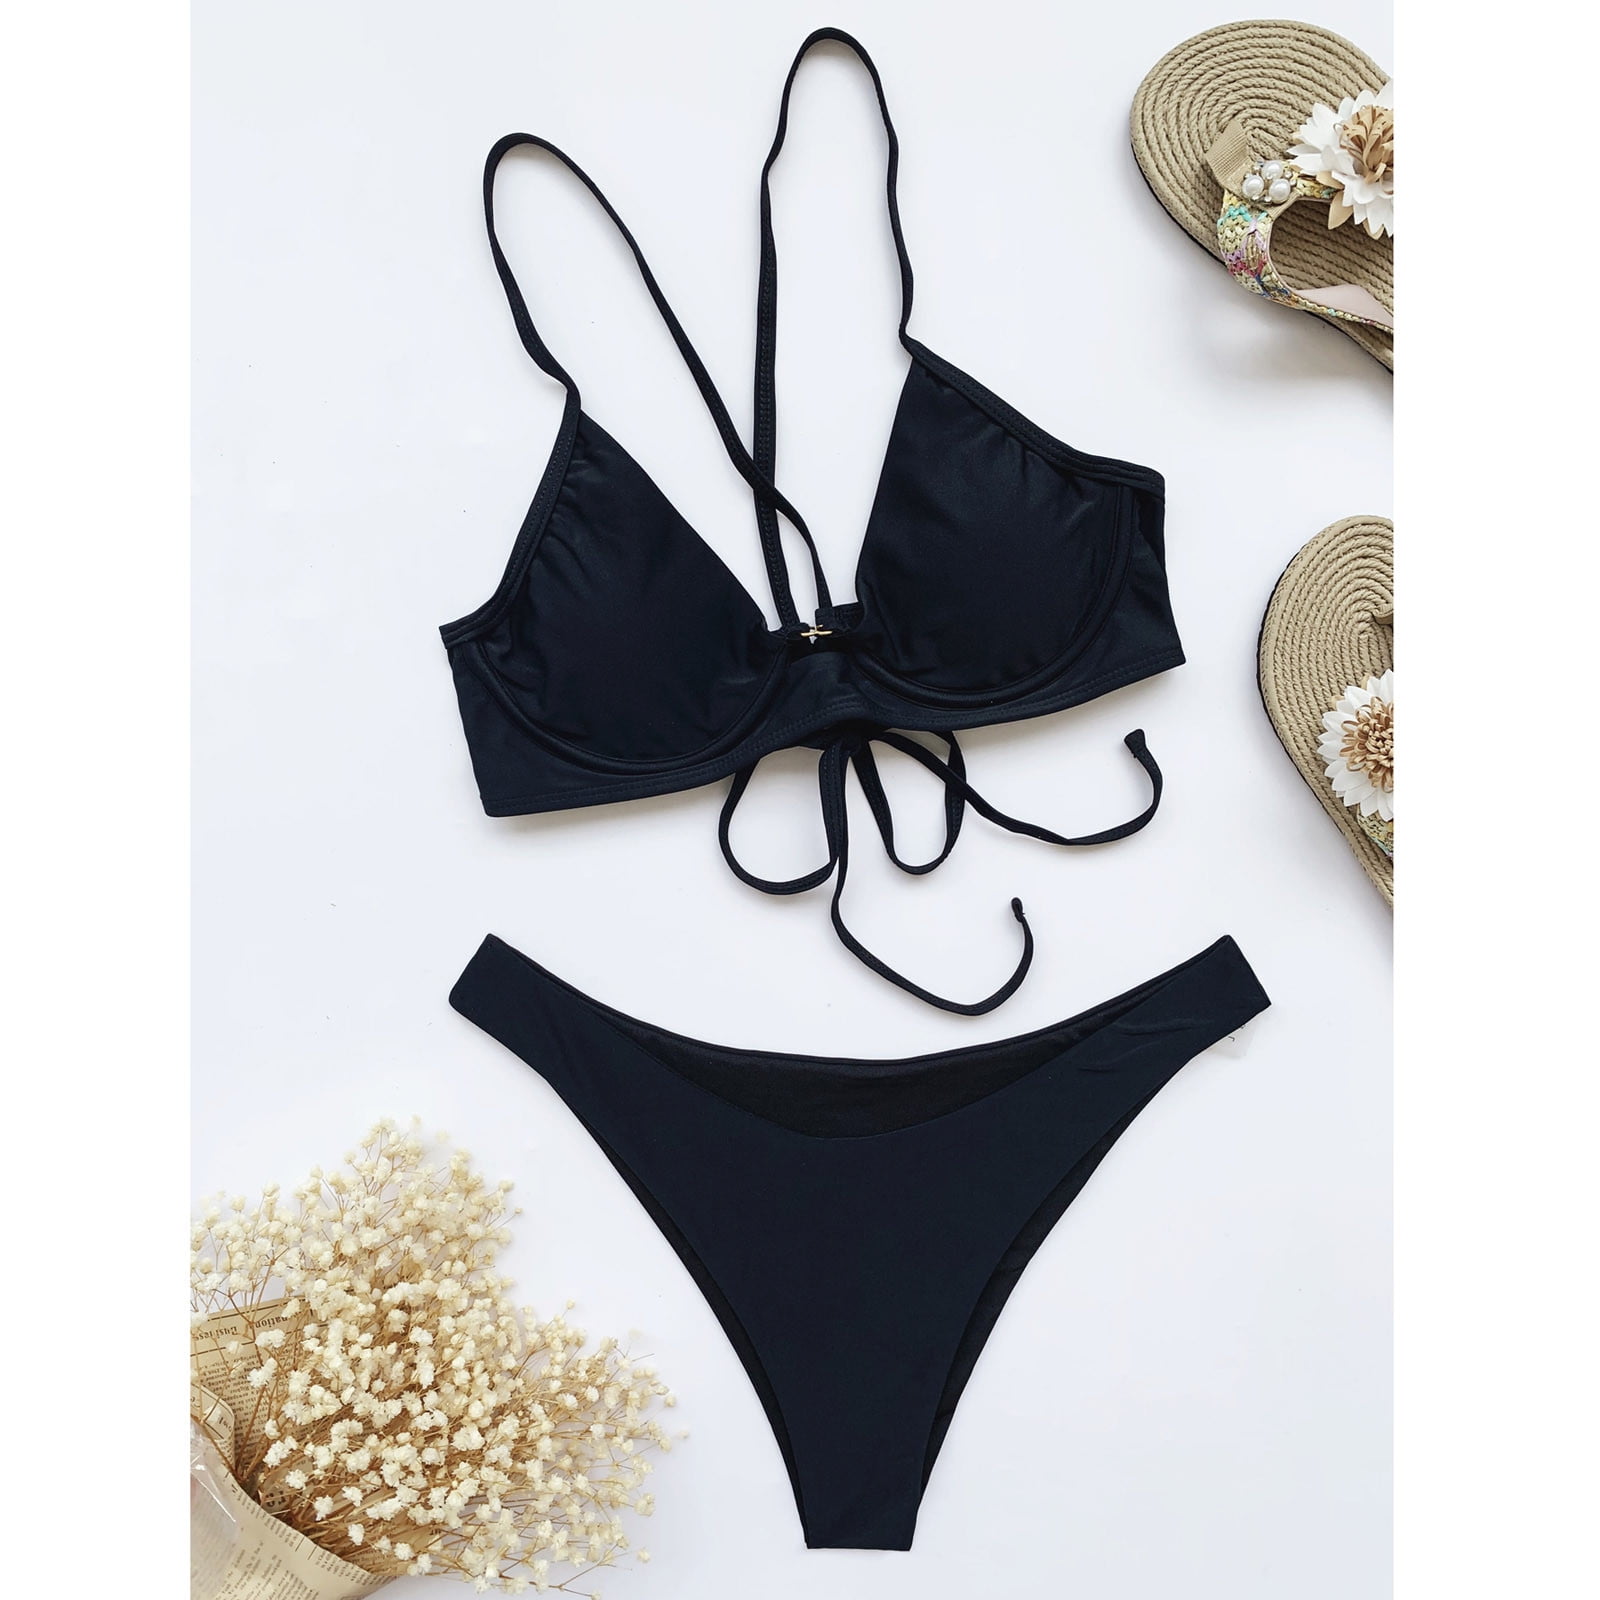 Generic Solid Color Lace Up Women Bikini Set Black Push Up Bra And Thong  Two Piece Bathing Swimming Suit Summer Sexy Beachwear Outfits